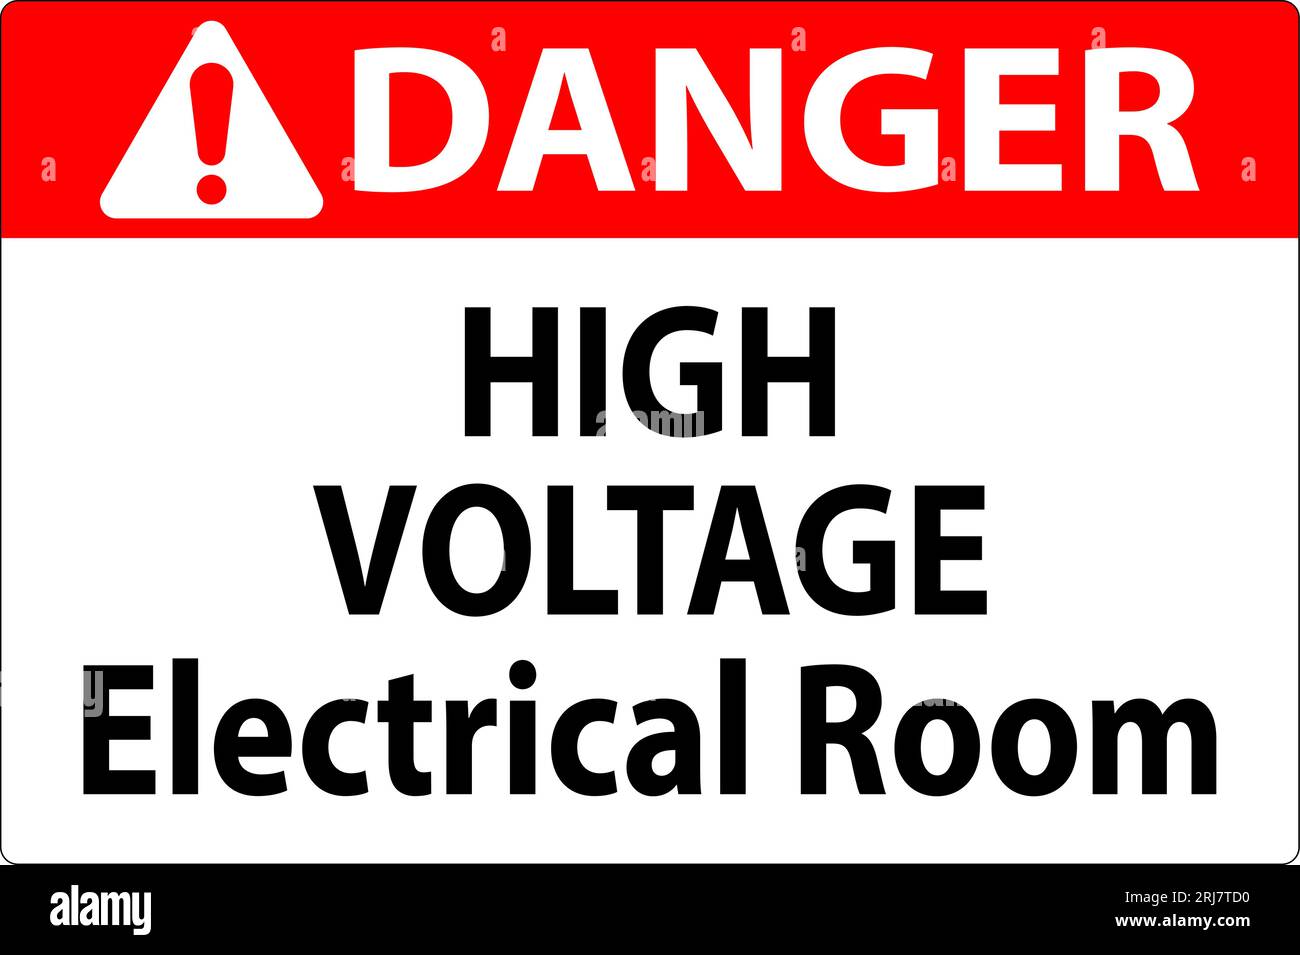 341,977 Electrical Room Images, Stock Photos & Vectors | Shutterstock